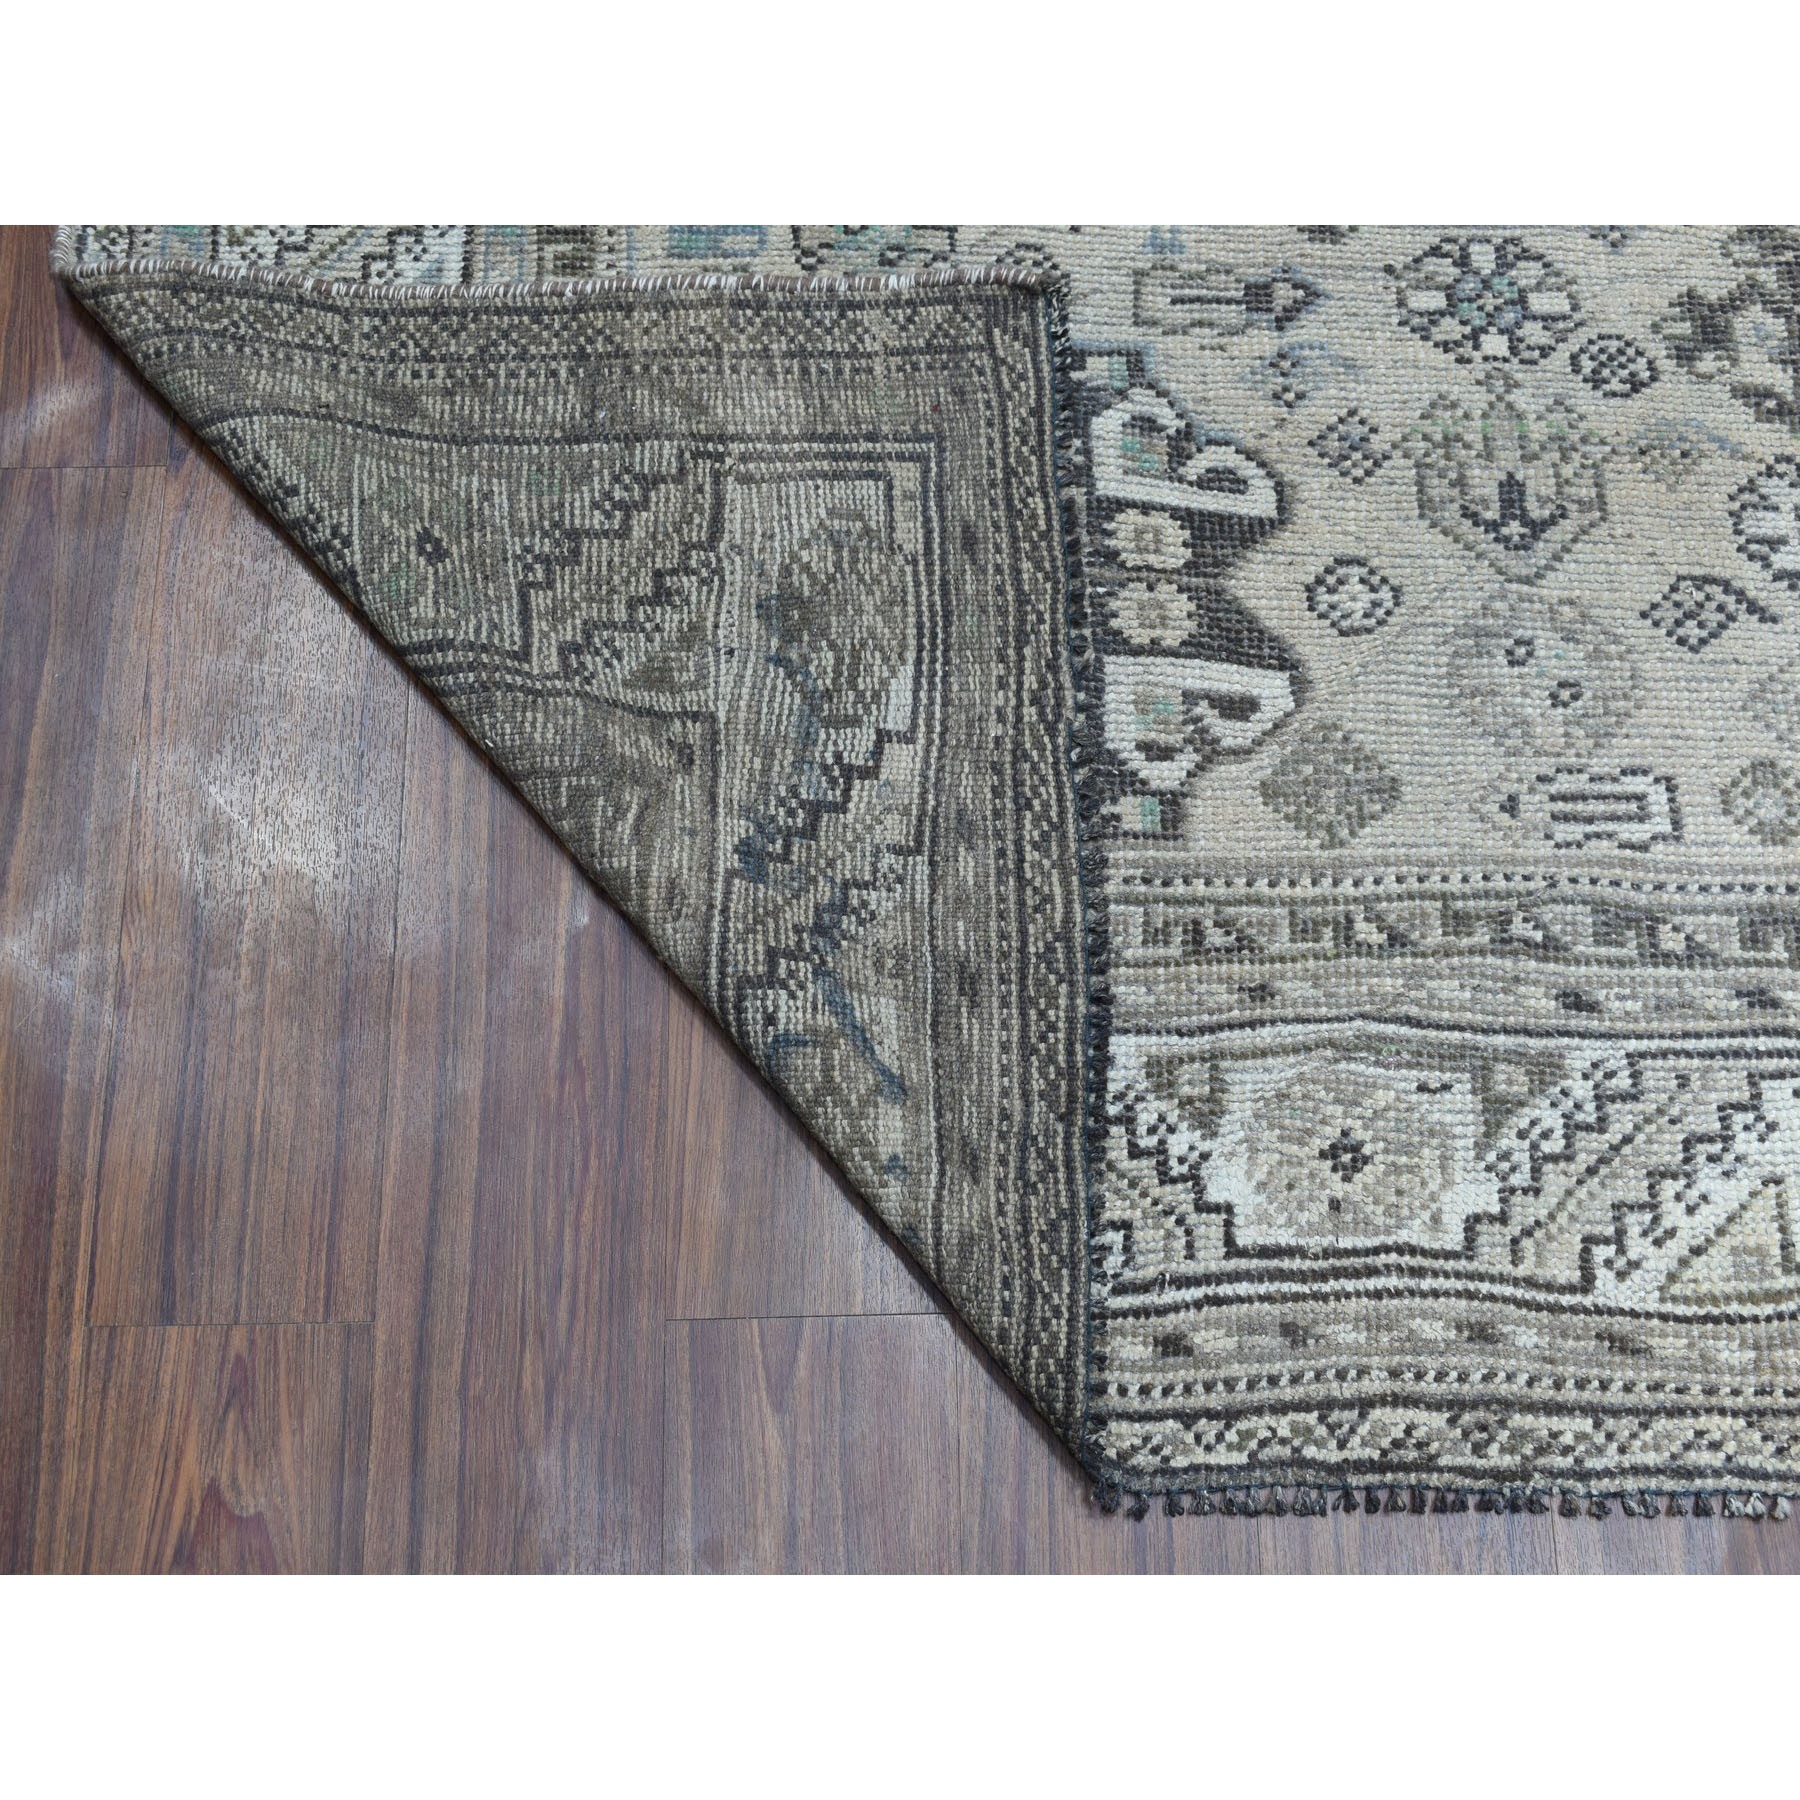 7-x10- Vintage And Worn Down Distressed Colors Persian Qashqai Hand Knotted Bohemian Rug 